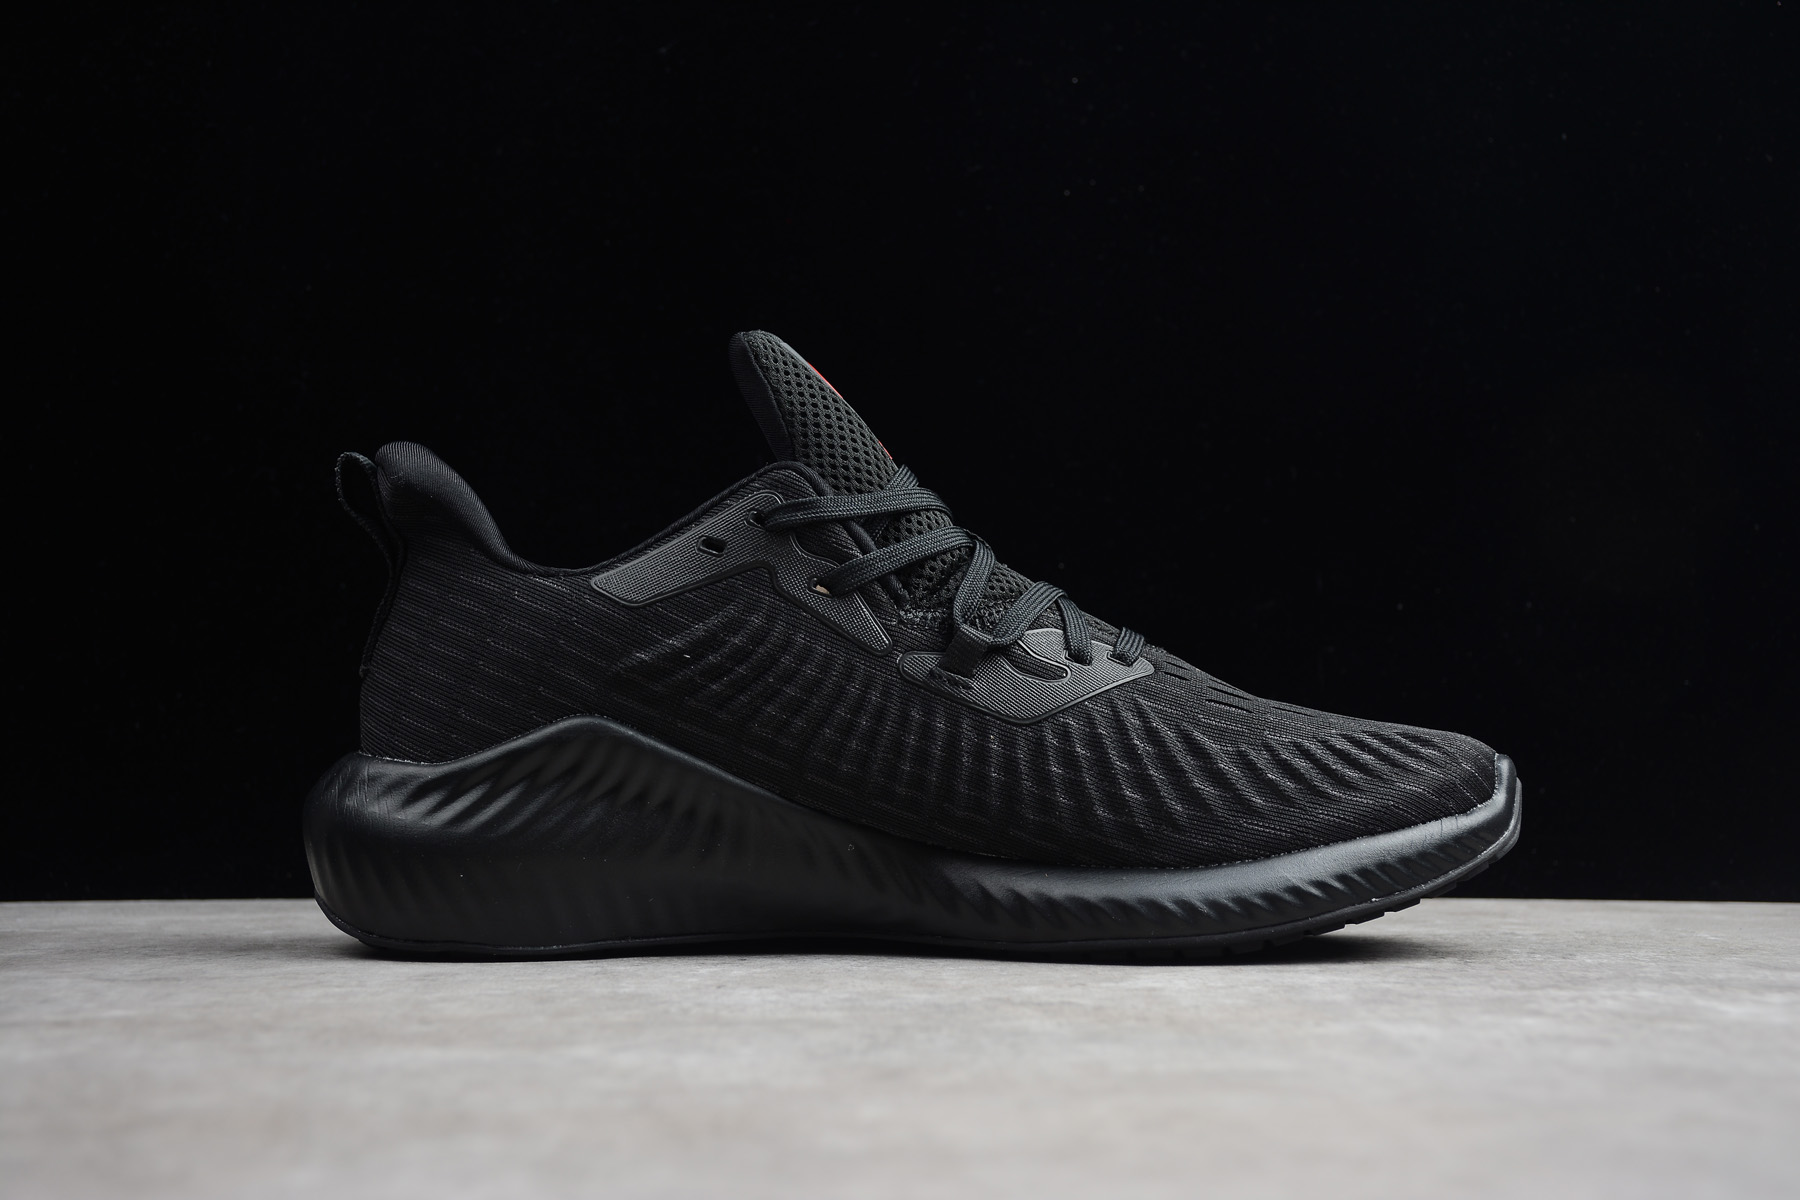 Adidas AlphaBounce Black Red G28590 – New Release Yeezy Boost 350